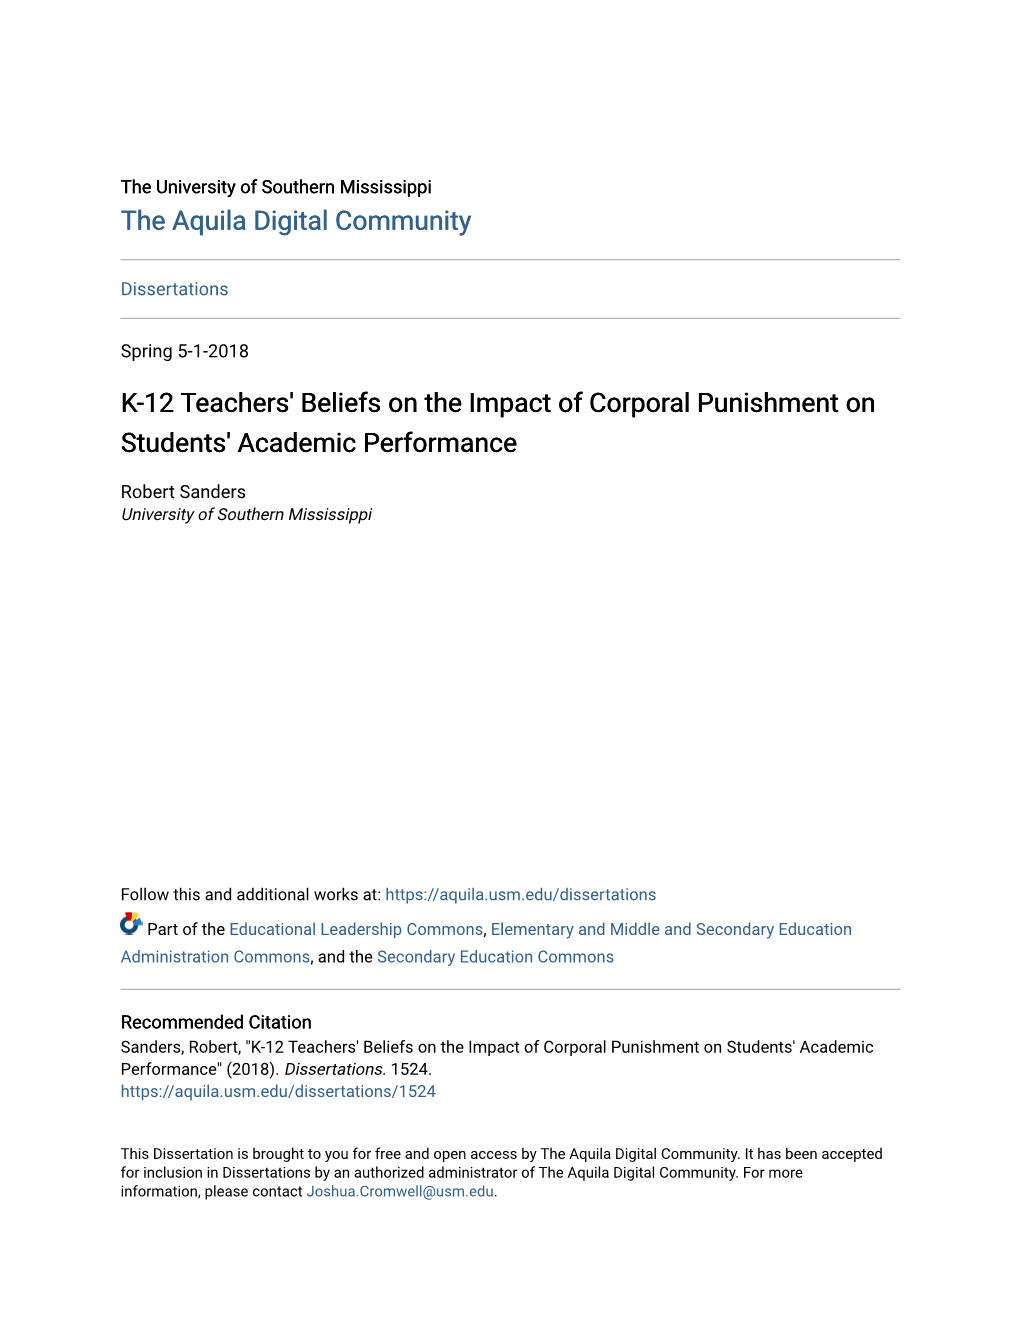 K-12 Teachers' Beliefs on the Impact of Corporal Punishment on Students' Academic Performance